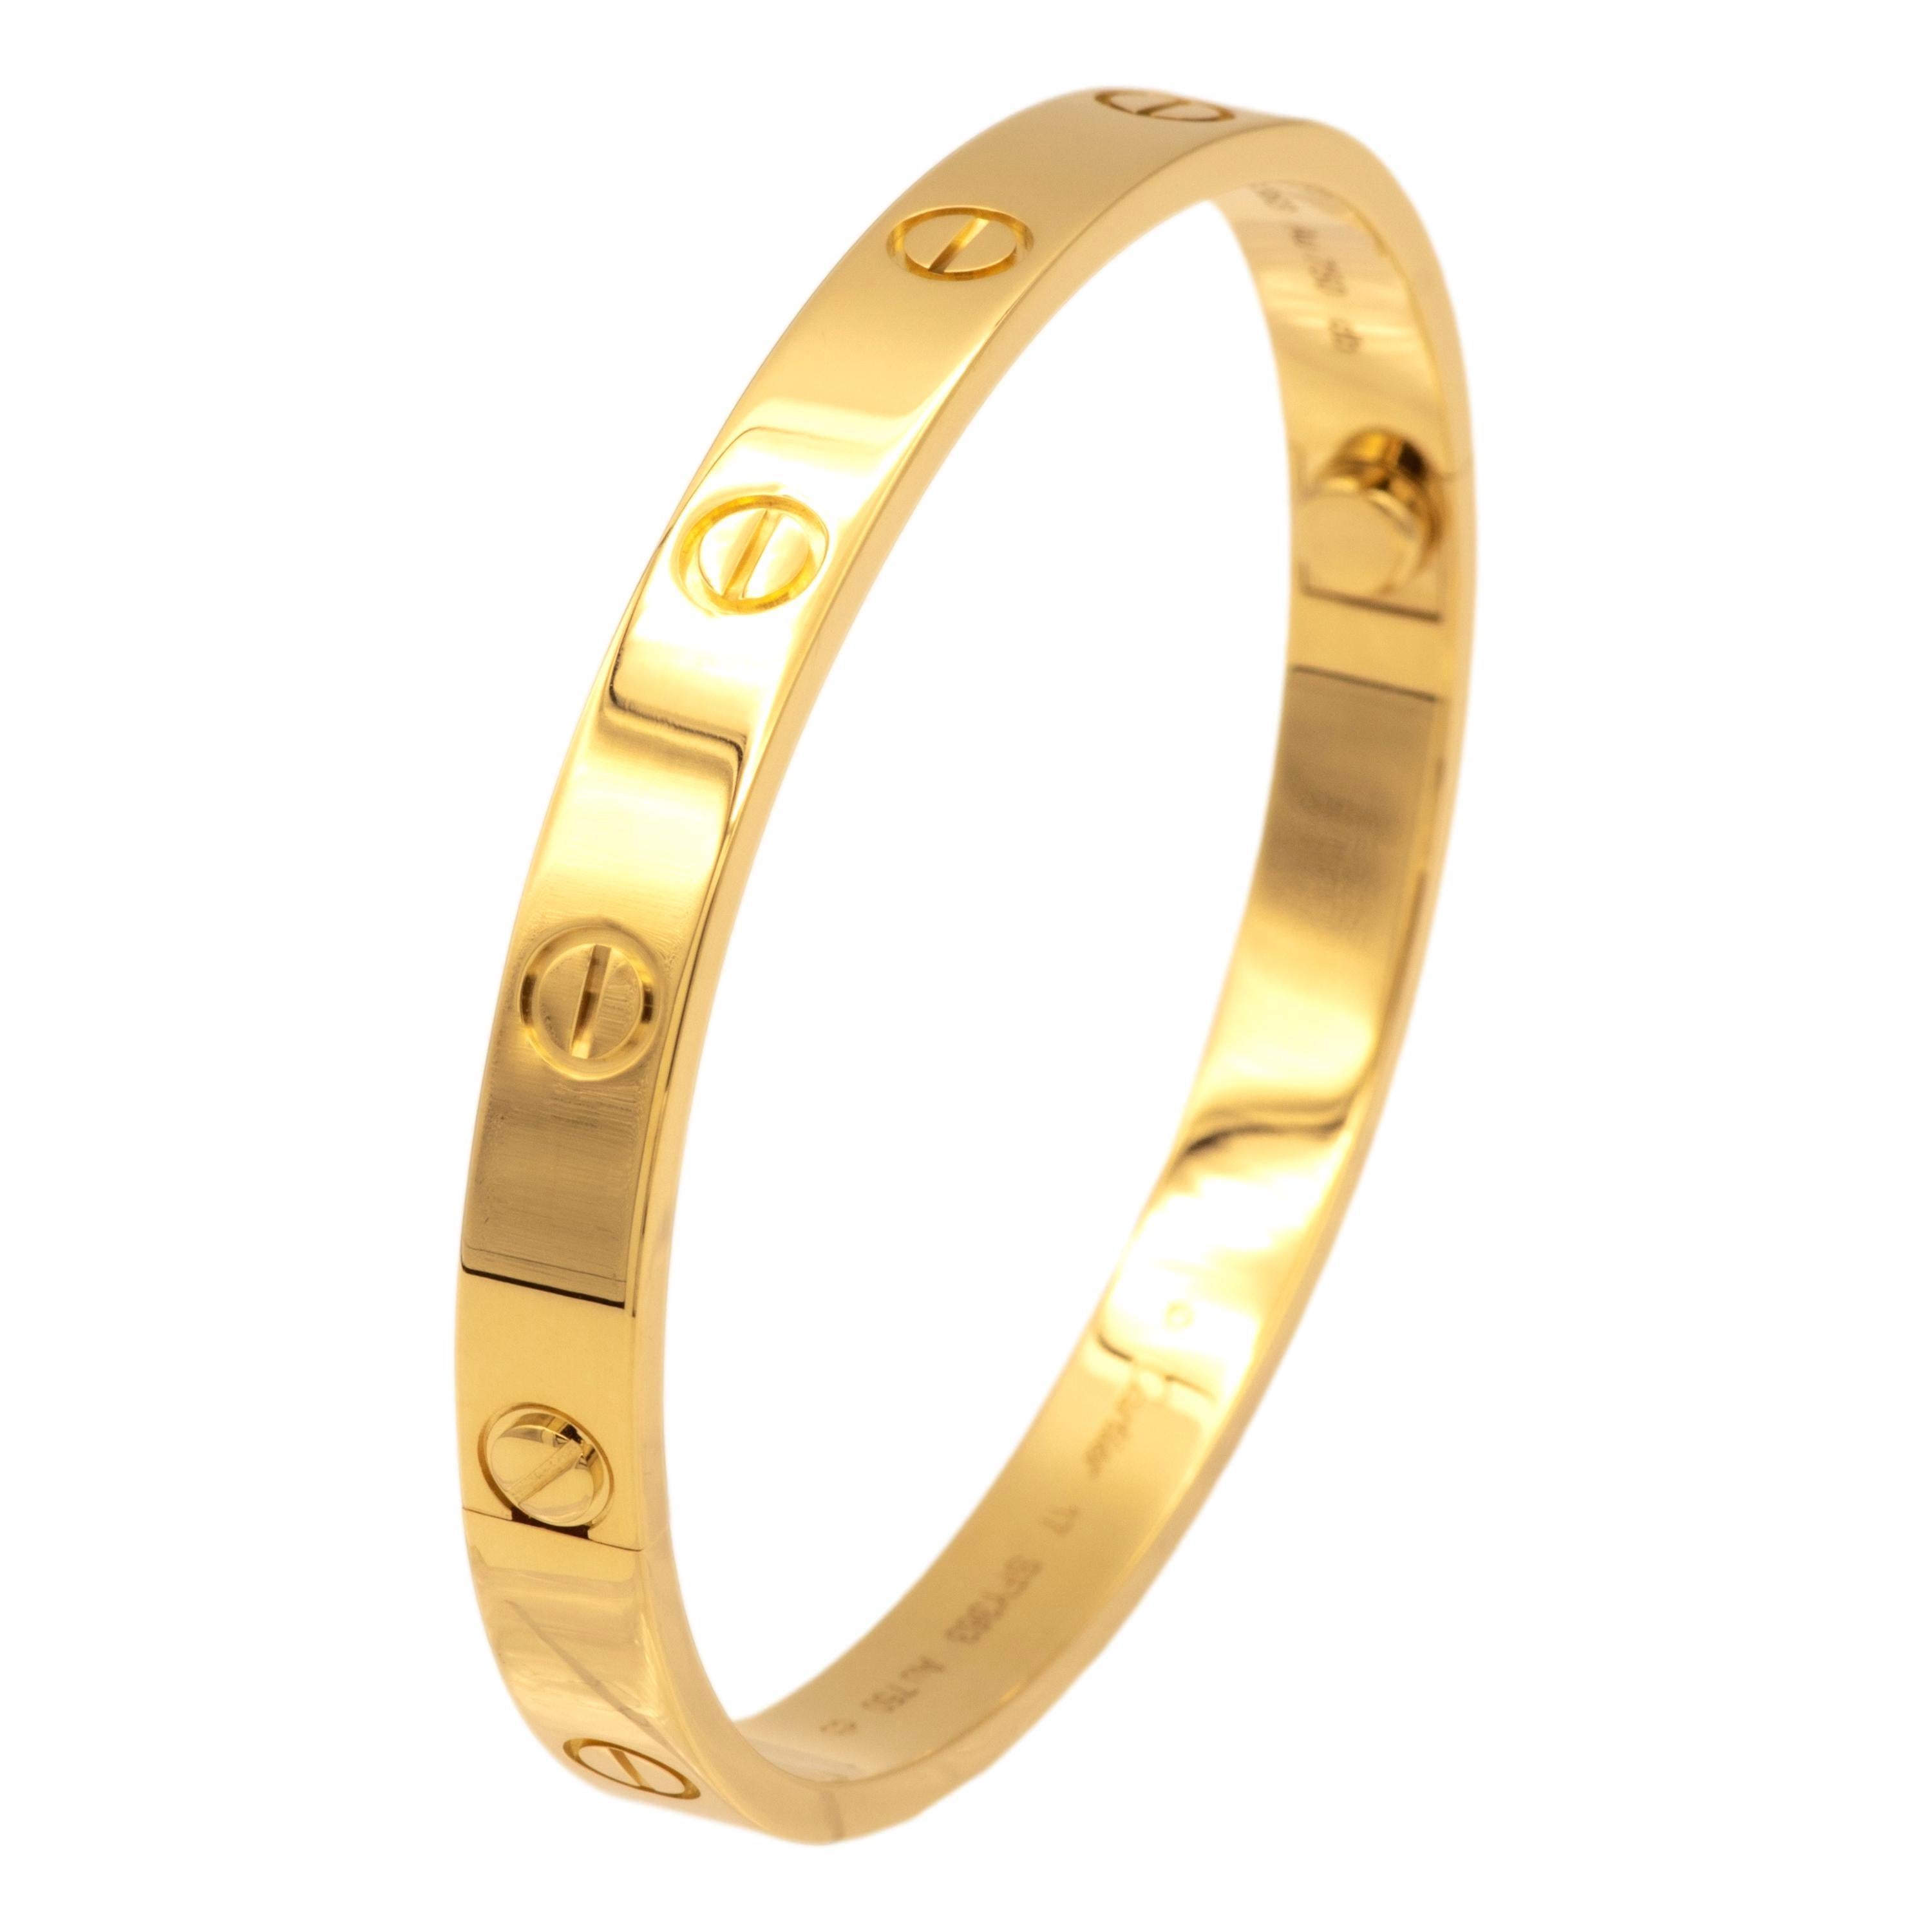 Cartier bangle bracelet from the iconic Love collection finely crafted in 18 karat yellow gold featuring screw motifs all the way around in a size 17. The closure is designed with two screws placed on either side of the bracelet. Bracelet is fully